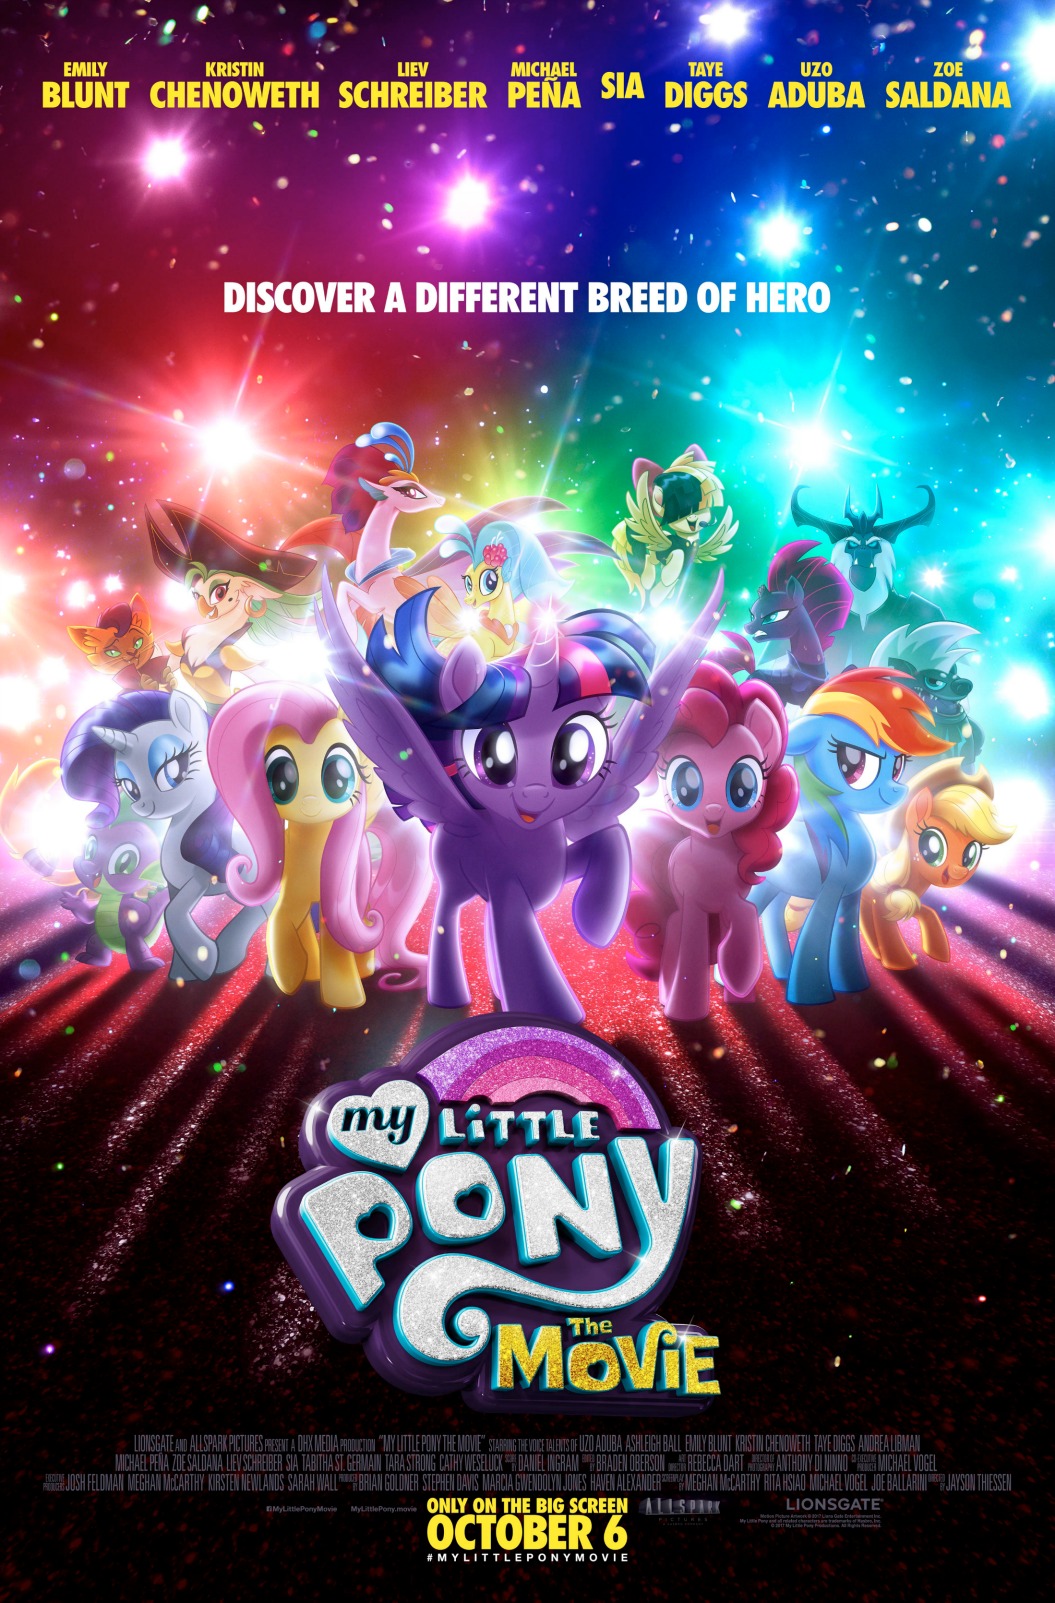 Enter the MY LITTLE PONY ticket giveaway to attend an advanced movie screening for MY LITTLE PONY: THE MOVIE September 30th at Harkins Tempe Marketplace.